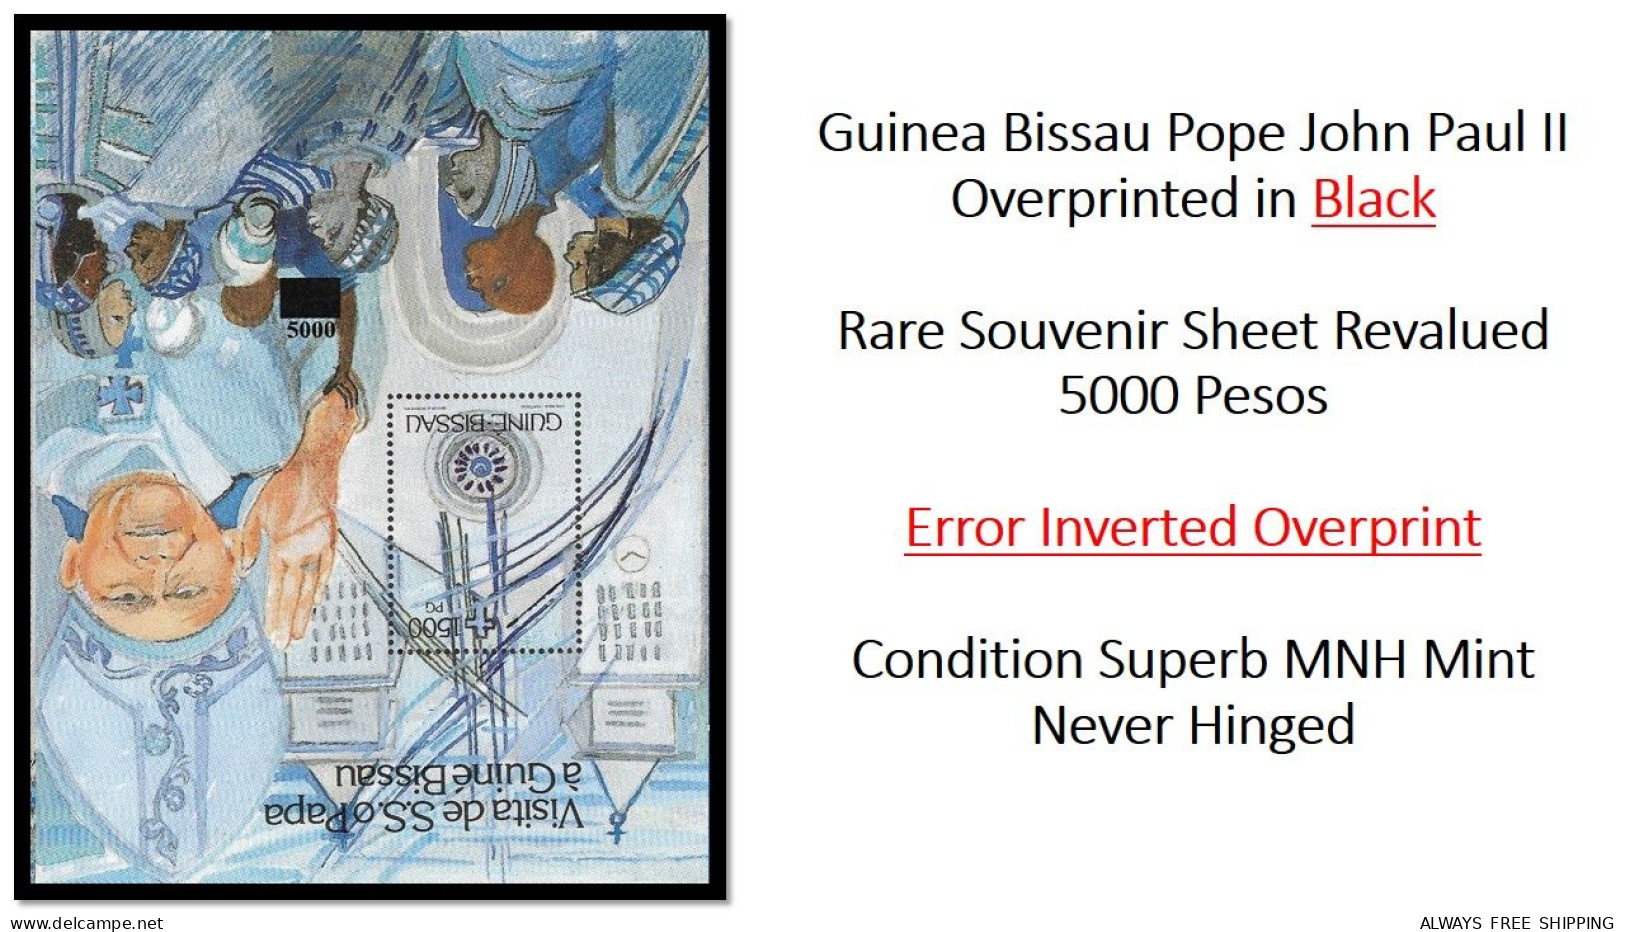 Guinea Bissau 1999 His Holiness Pope John Paul II - Error Overprint Inverted Surcharge Rare Only 5 Exist MNH - Päpste